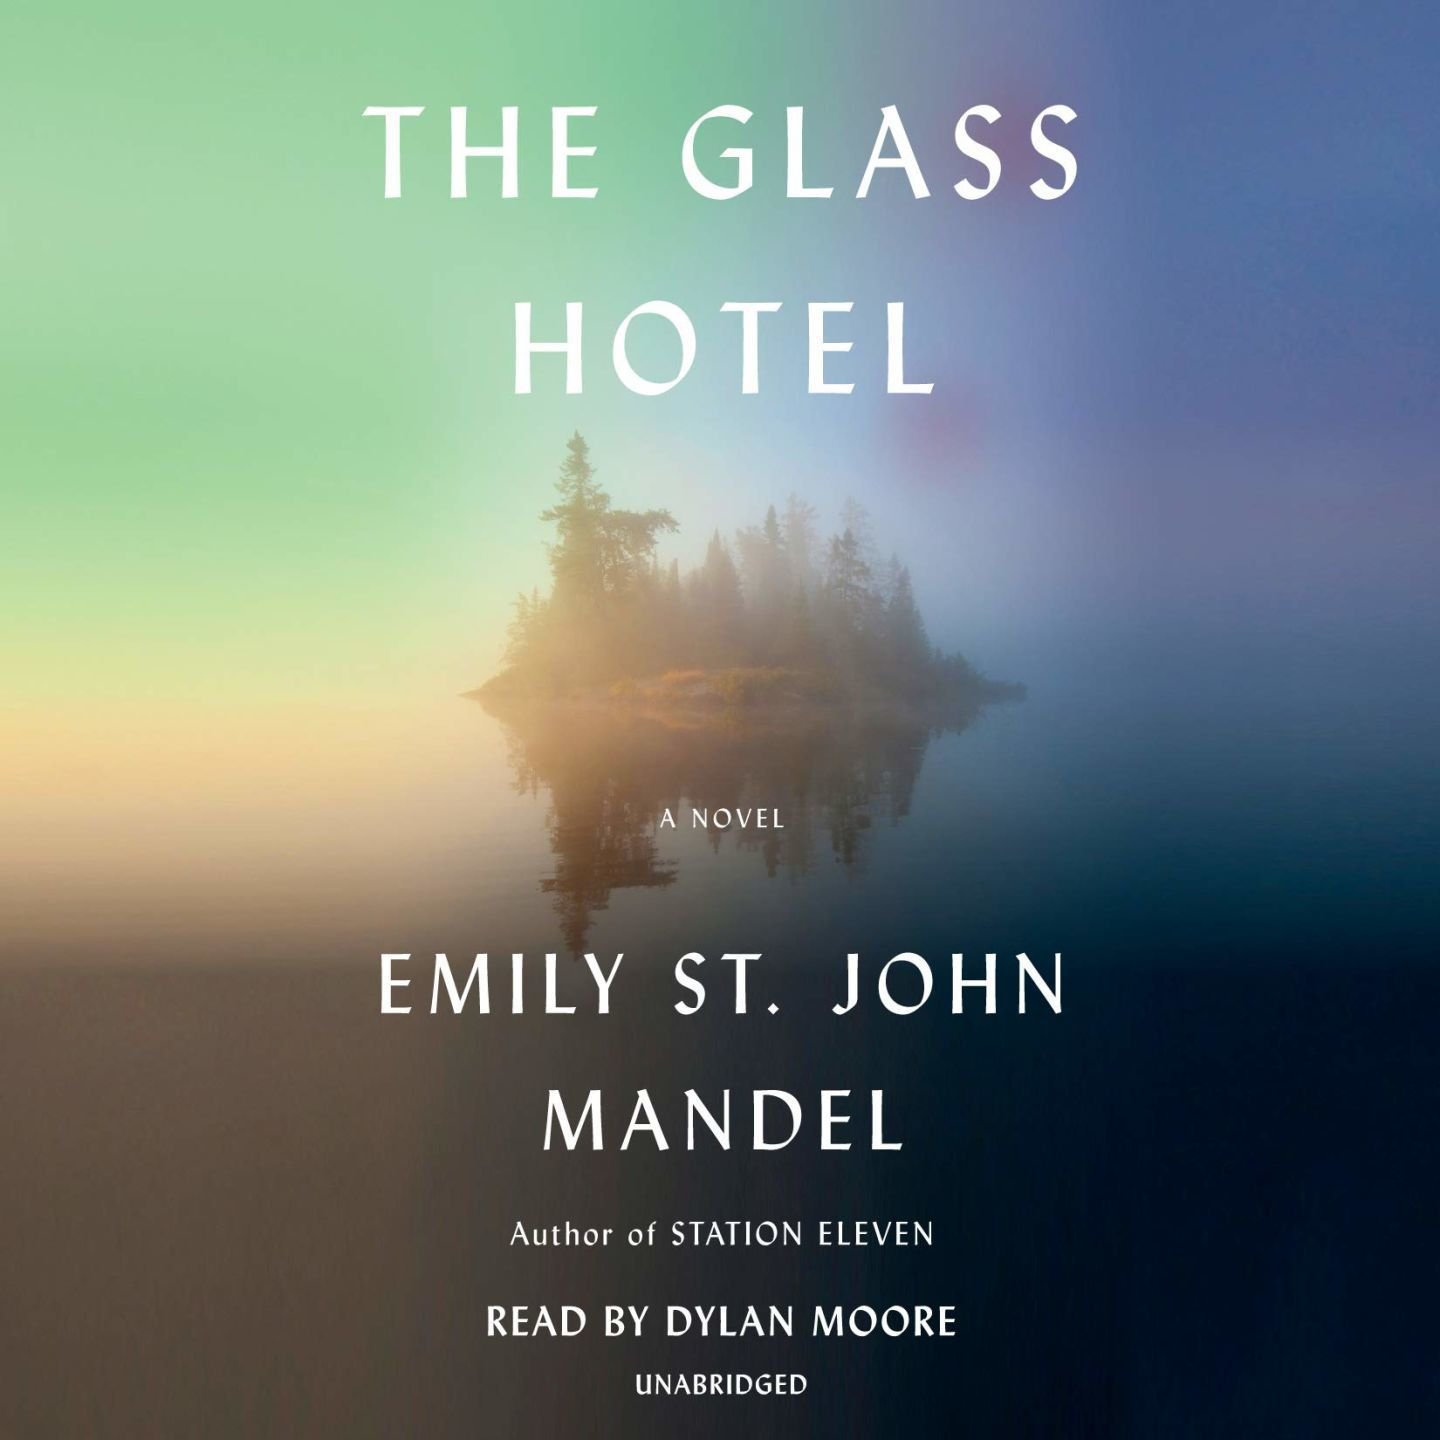 the glass hotel book review